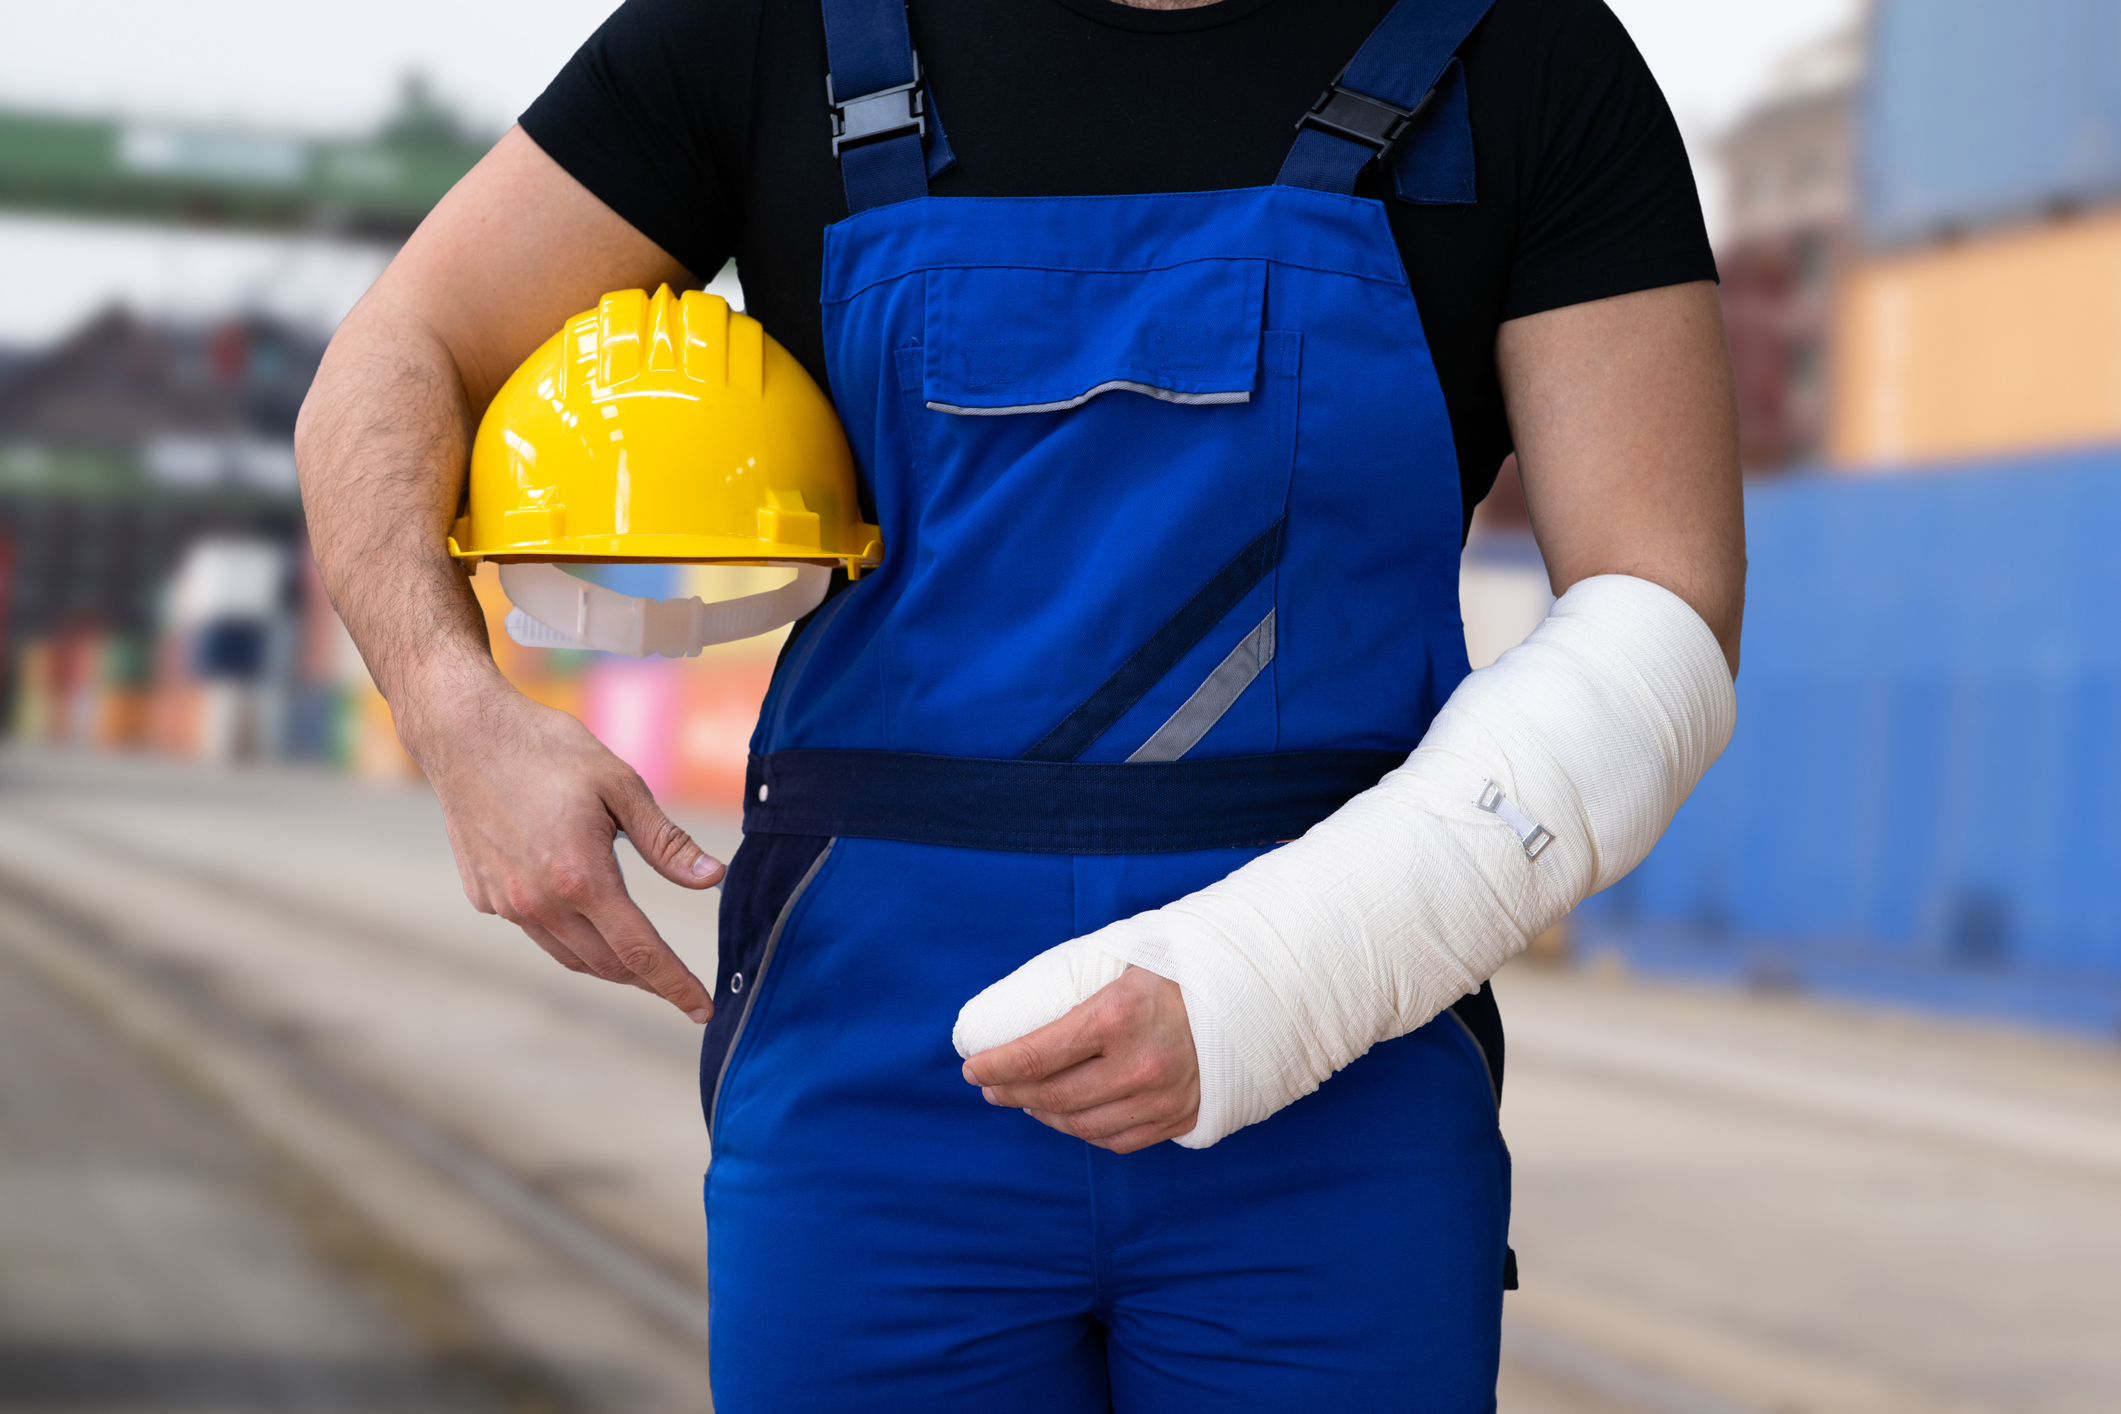 Texas Industrial Accident and Injuries Covered by Workers’ Compensation